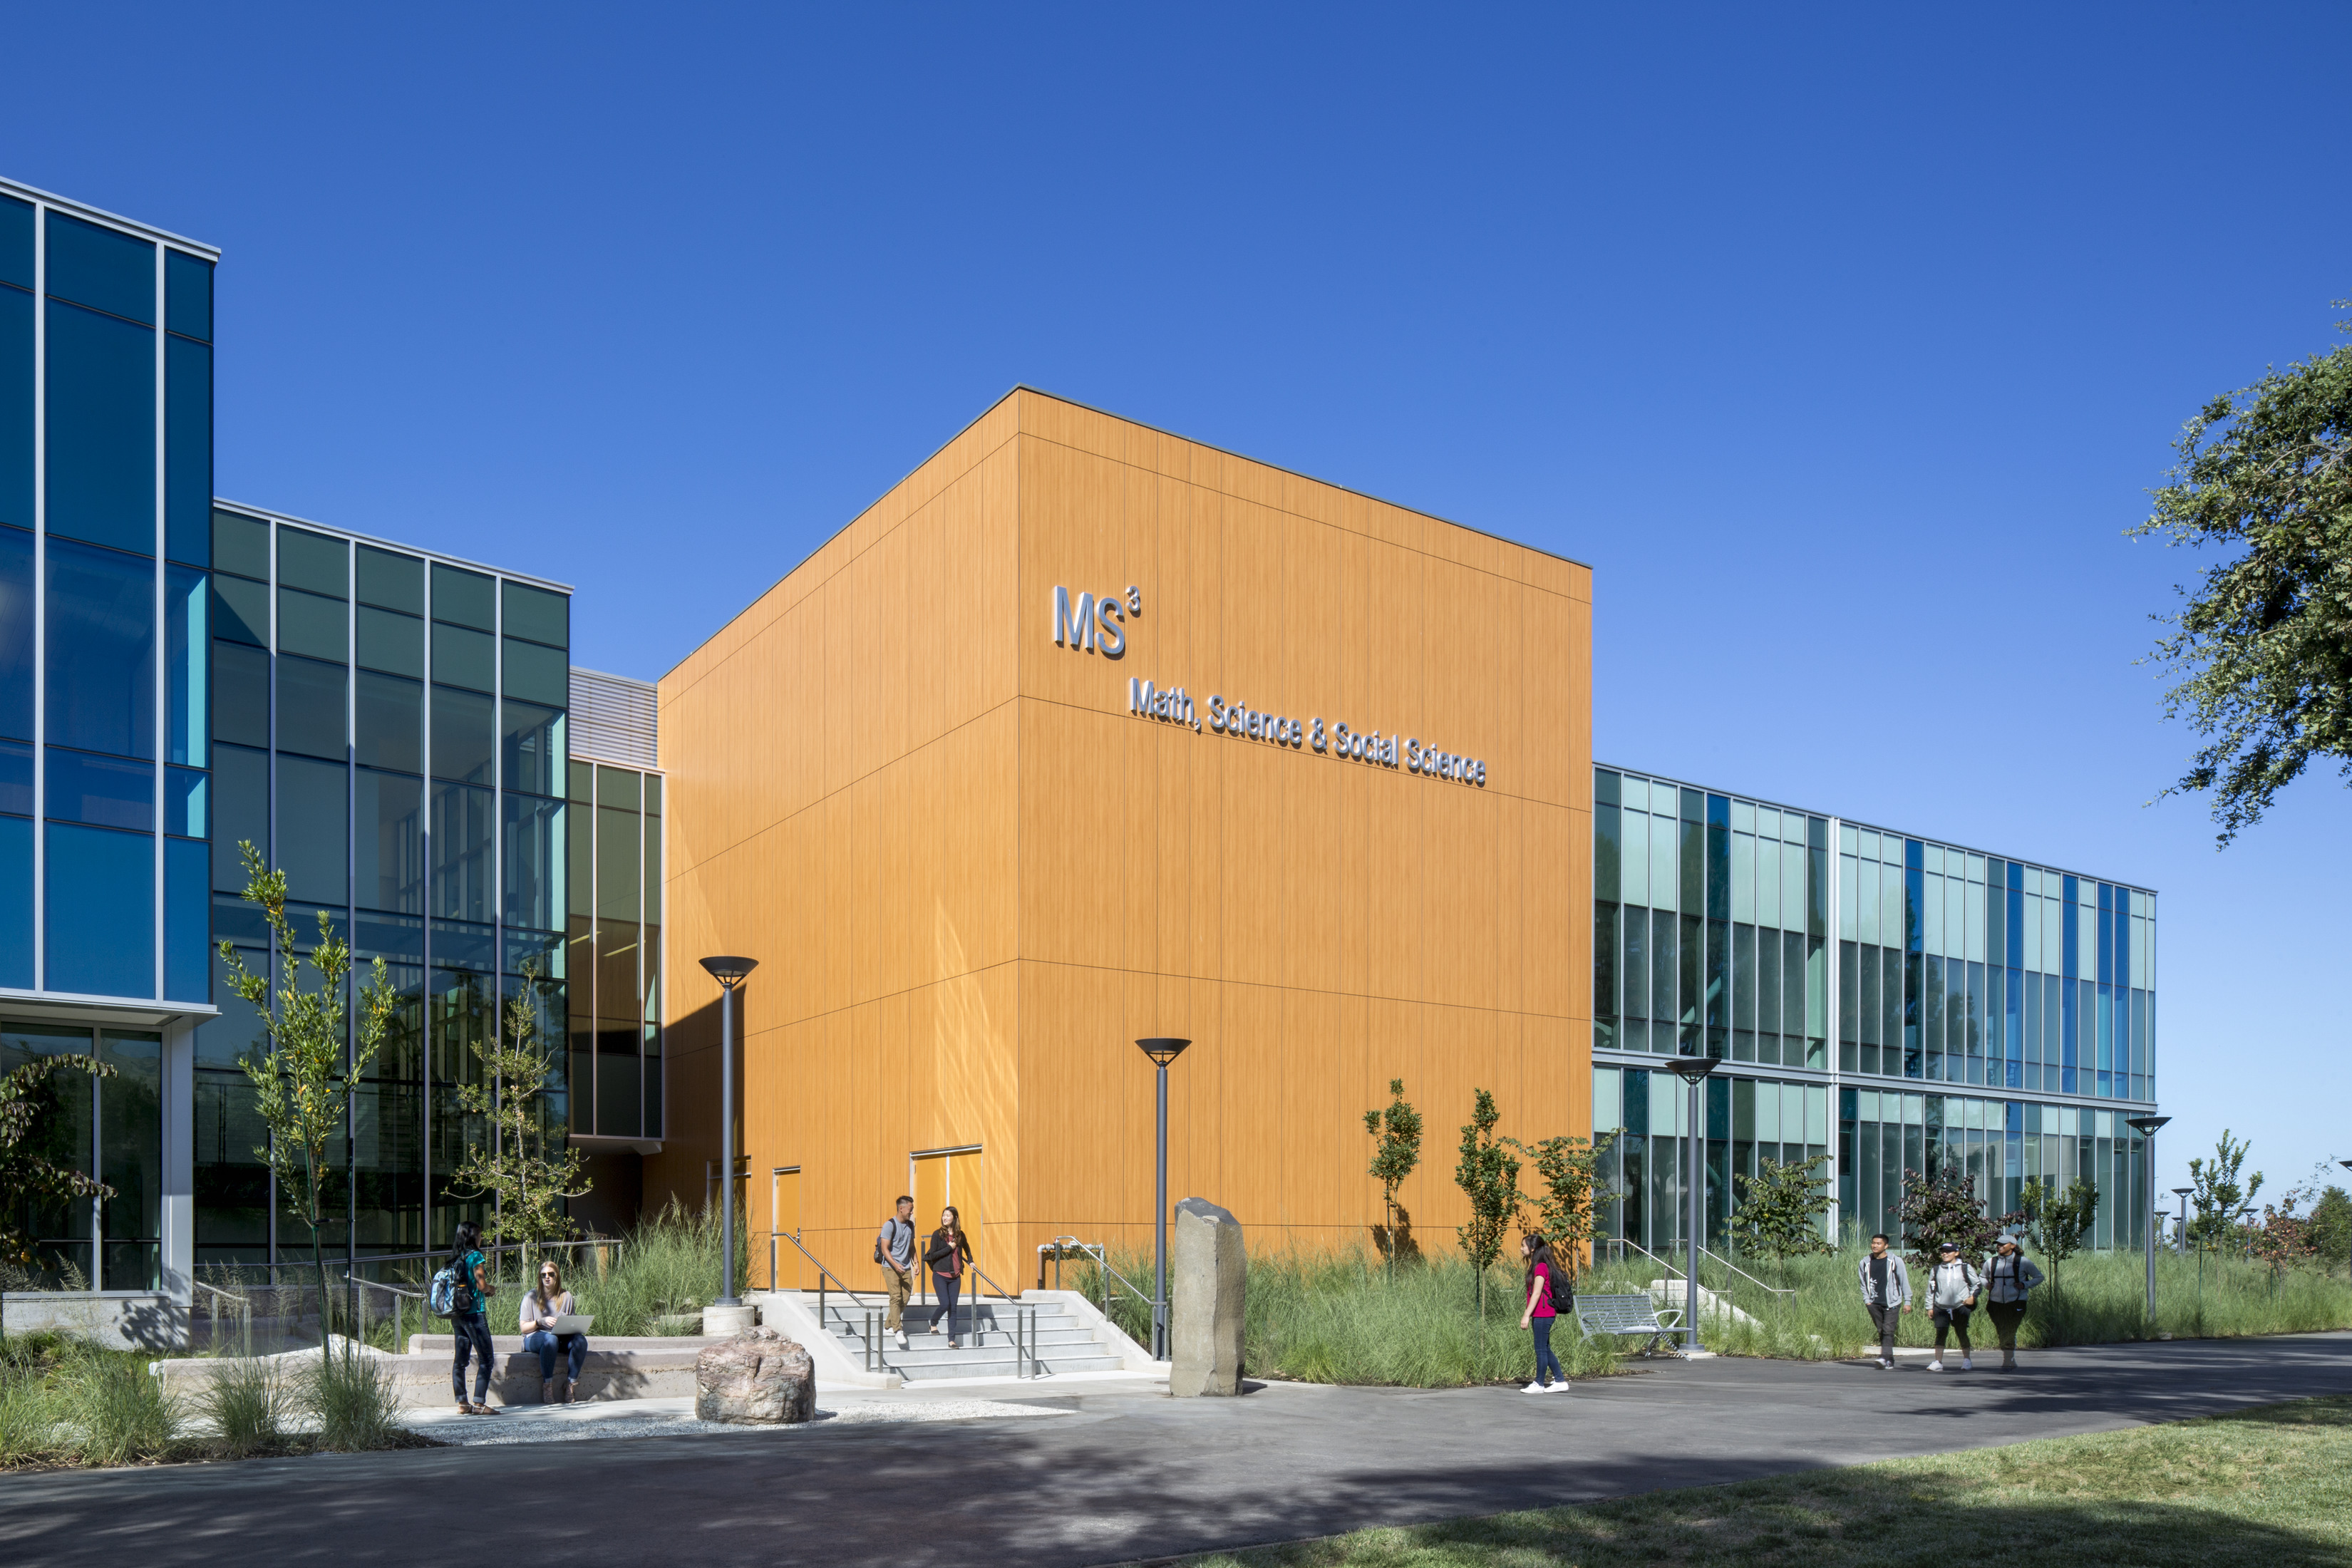 Evergreen Valley College Math Science And Social Science Building Achieves LEED Platinum